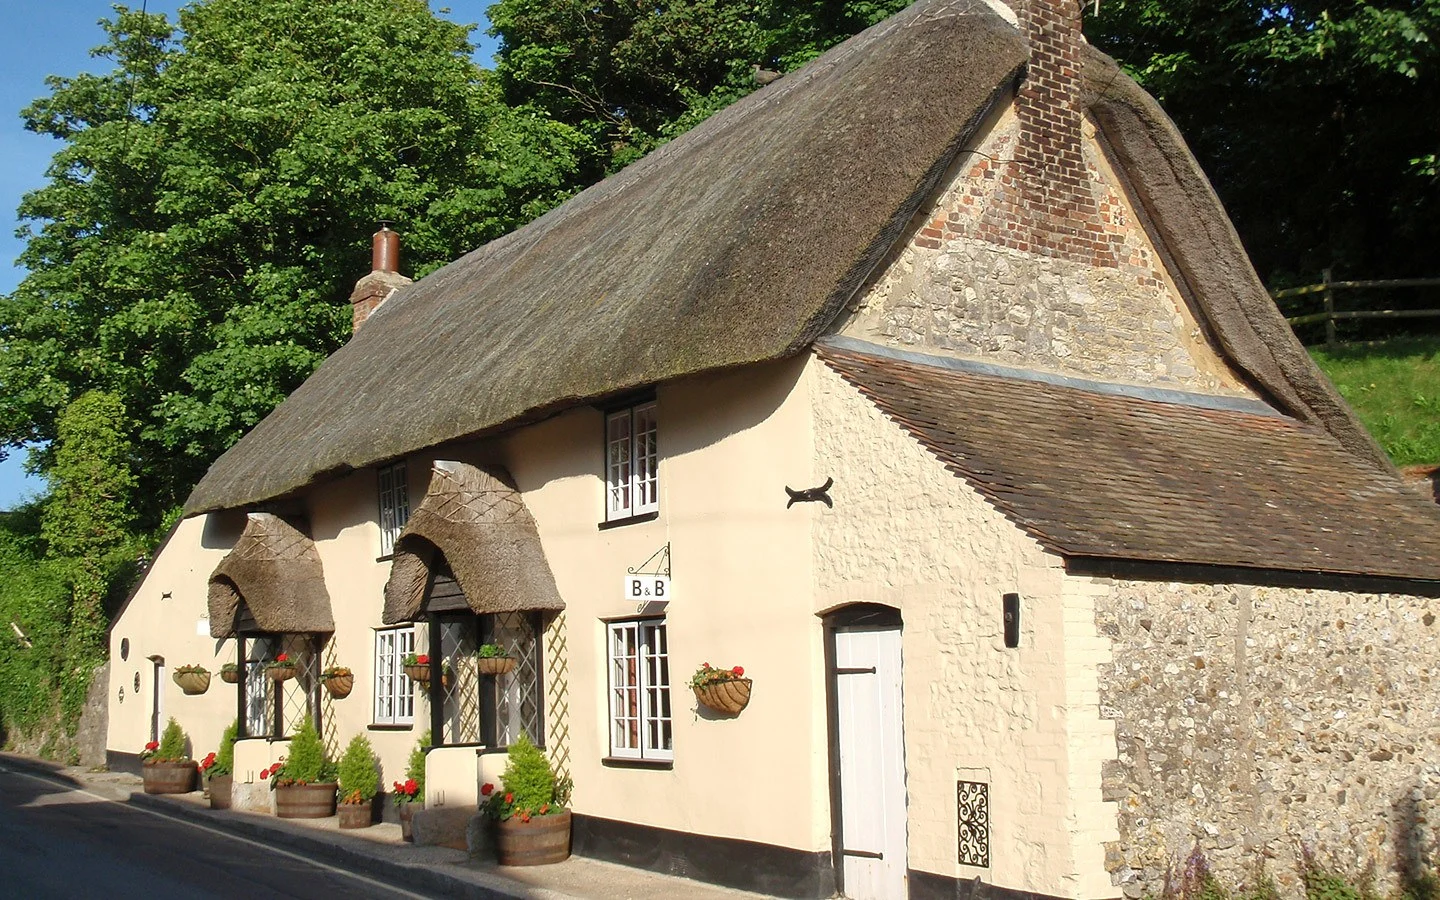 Thatched cottage in Dorset